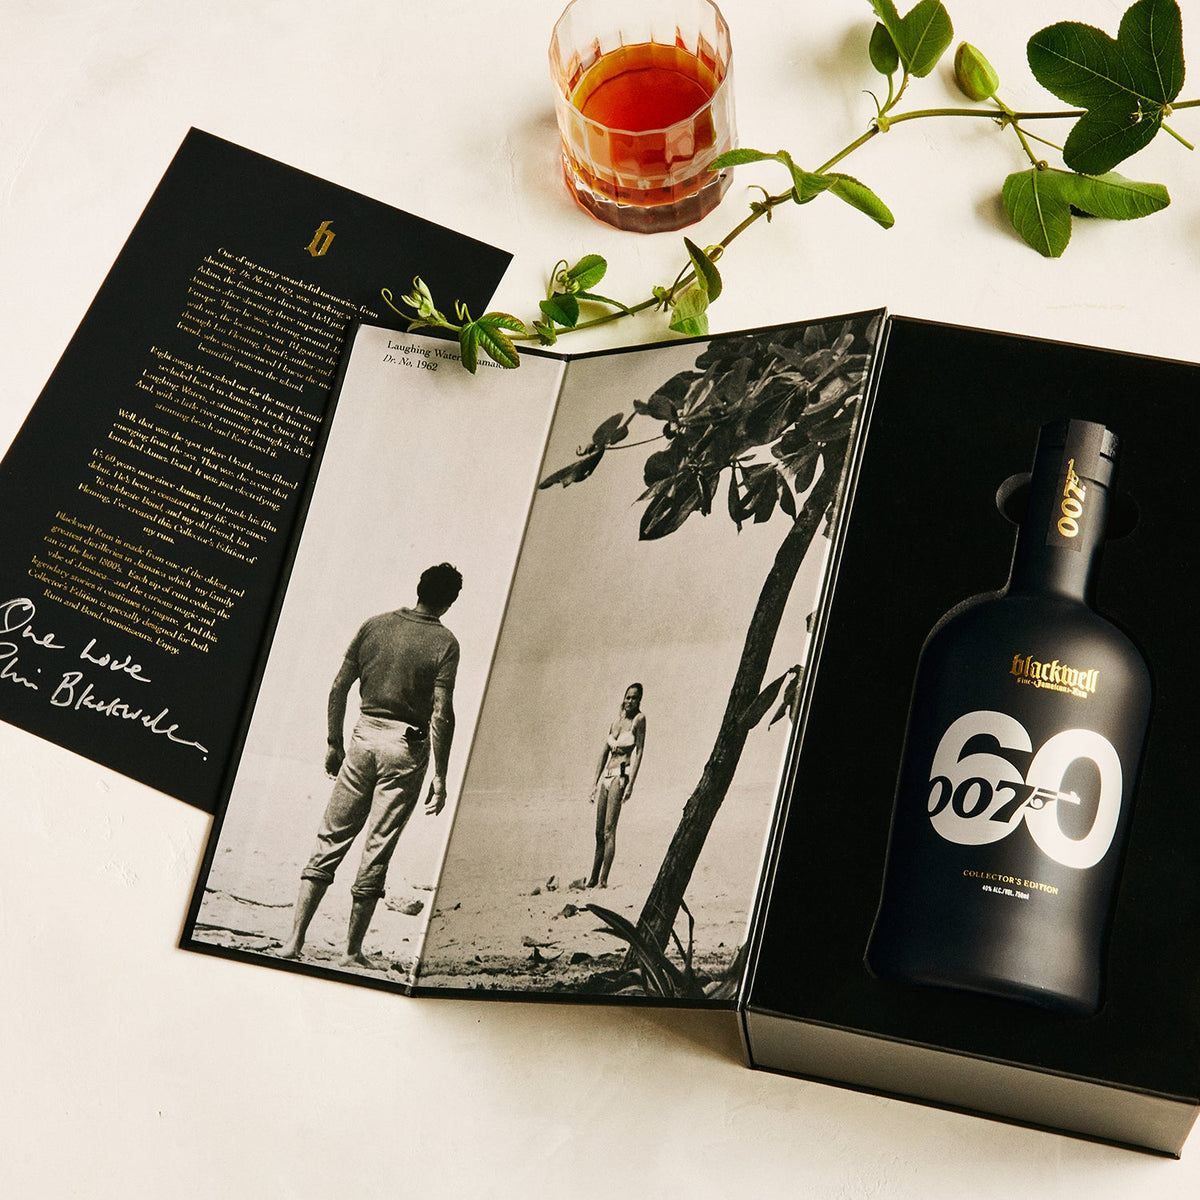 James Bond Jamaican Rum - Signed &amp; Numbered Edition - By Blackwell Rum (US)